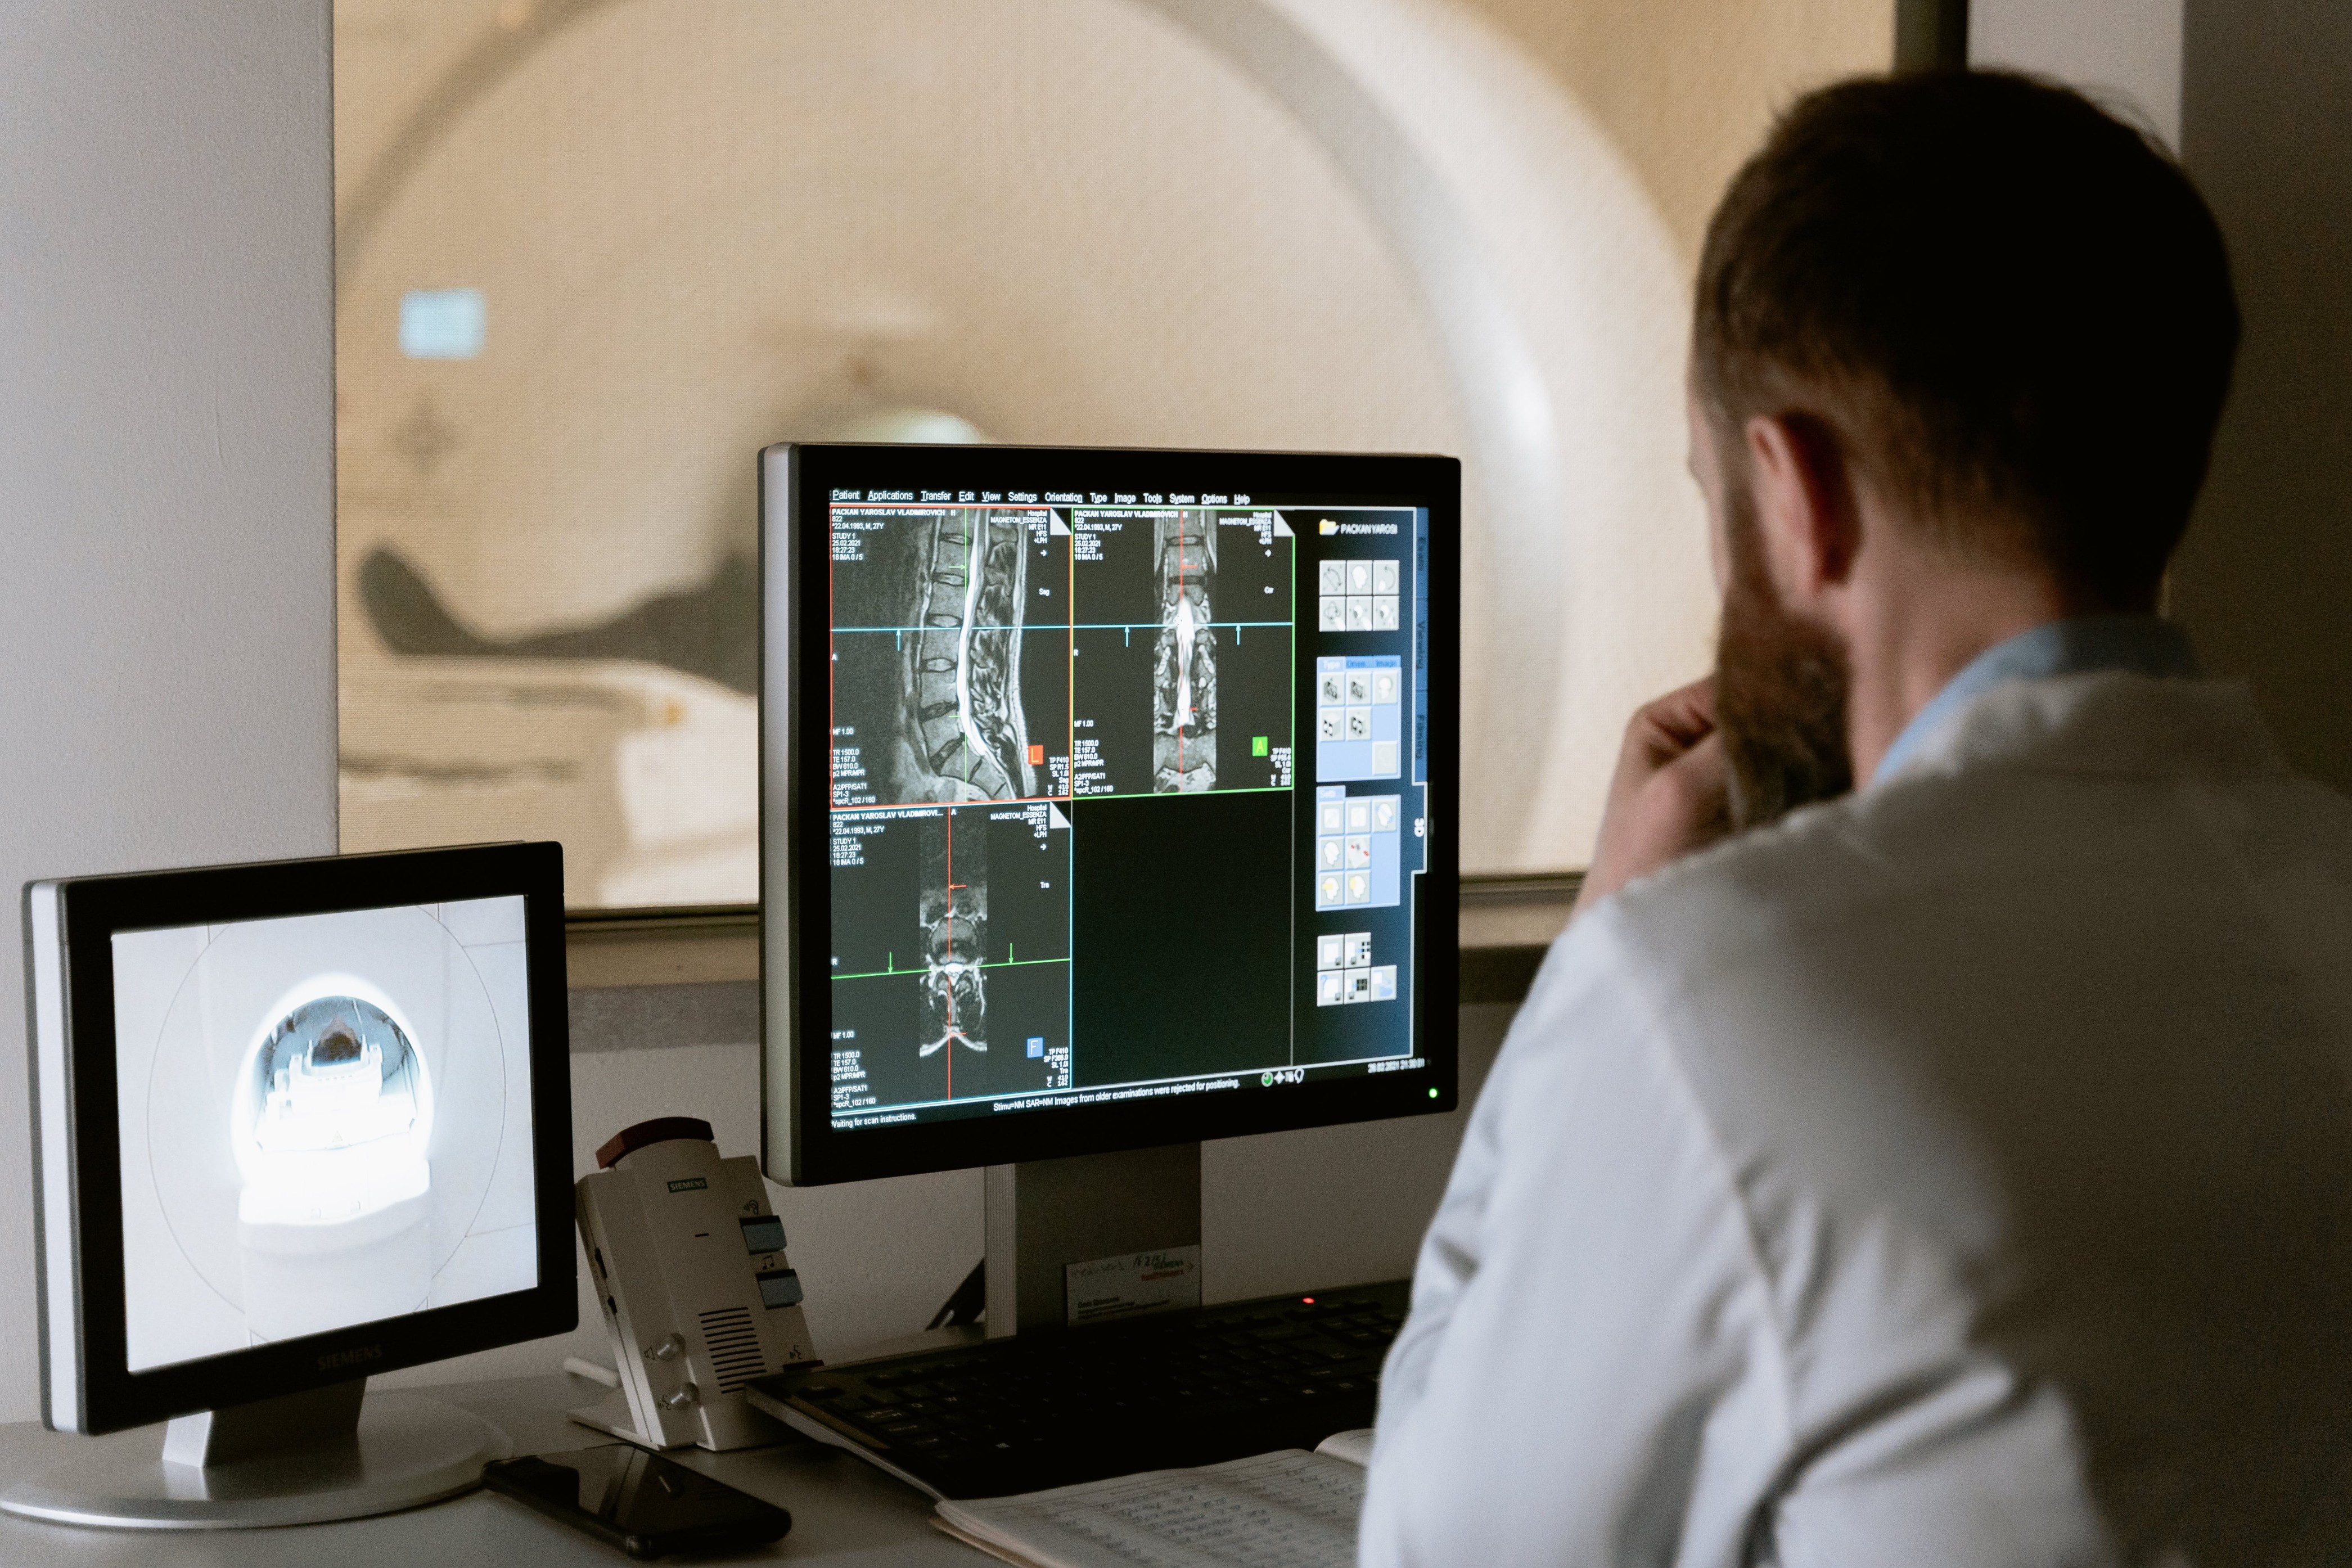 Radiography imaging can give specific details on changes related to medical conditions or structural changes.